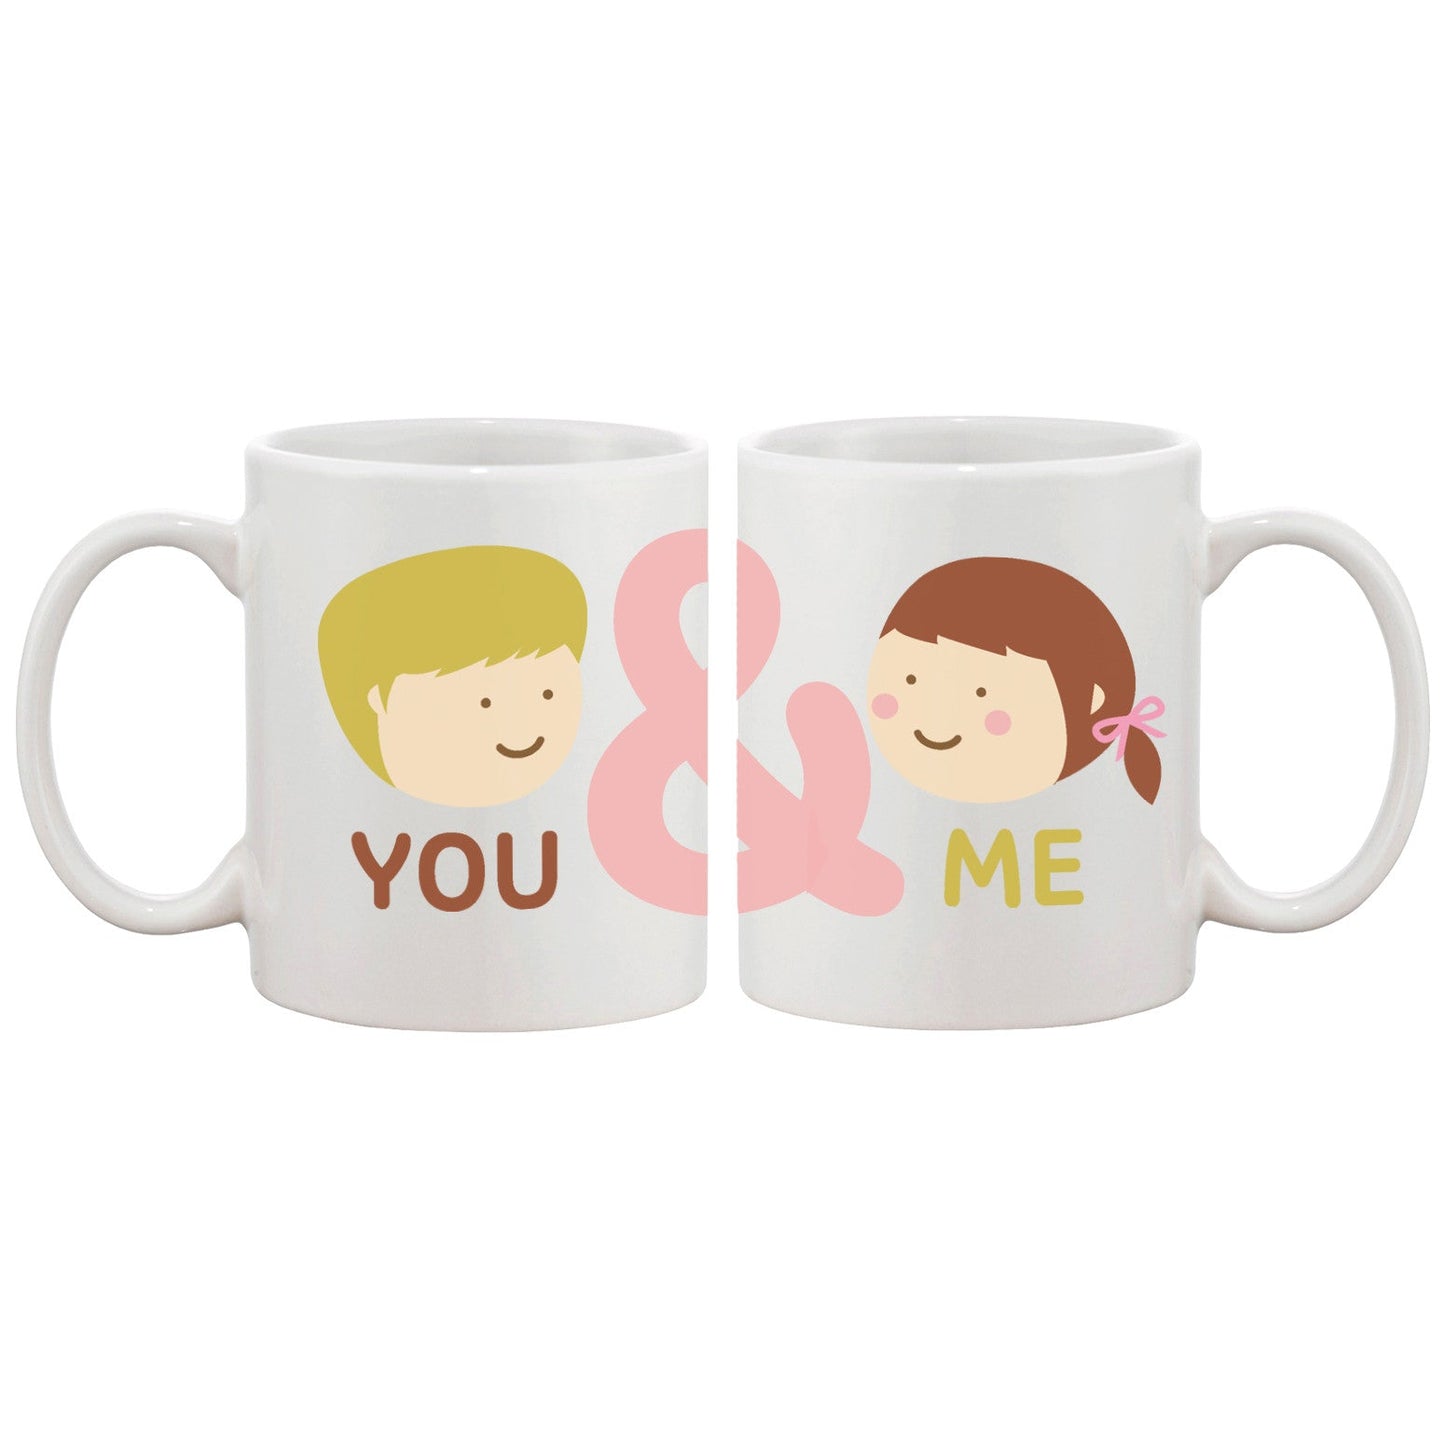 You And Me Matching Couple Mugs Cute Graphic Design Ceramic Coffee Mug Cup White